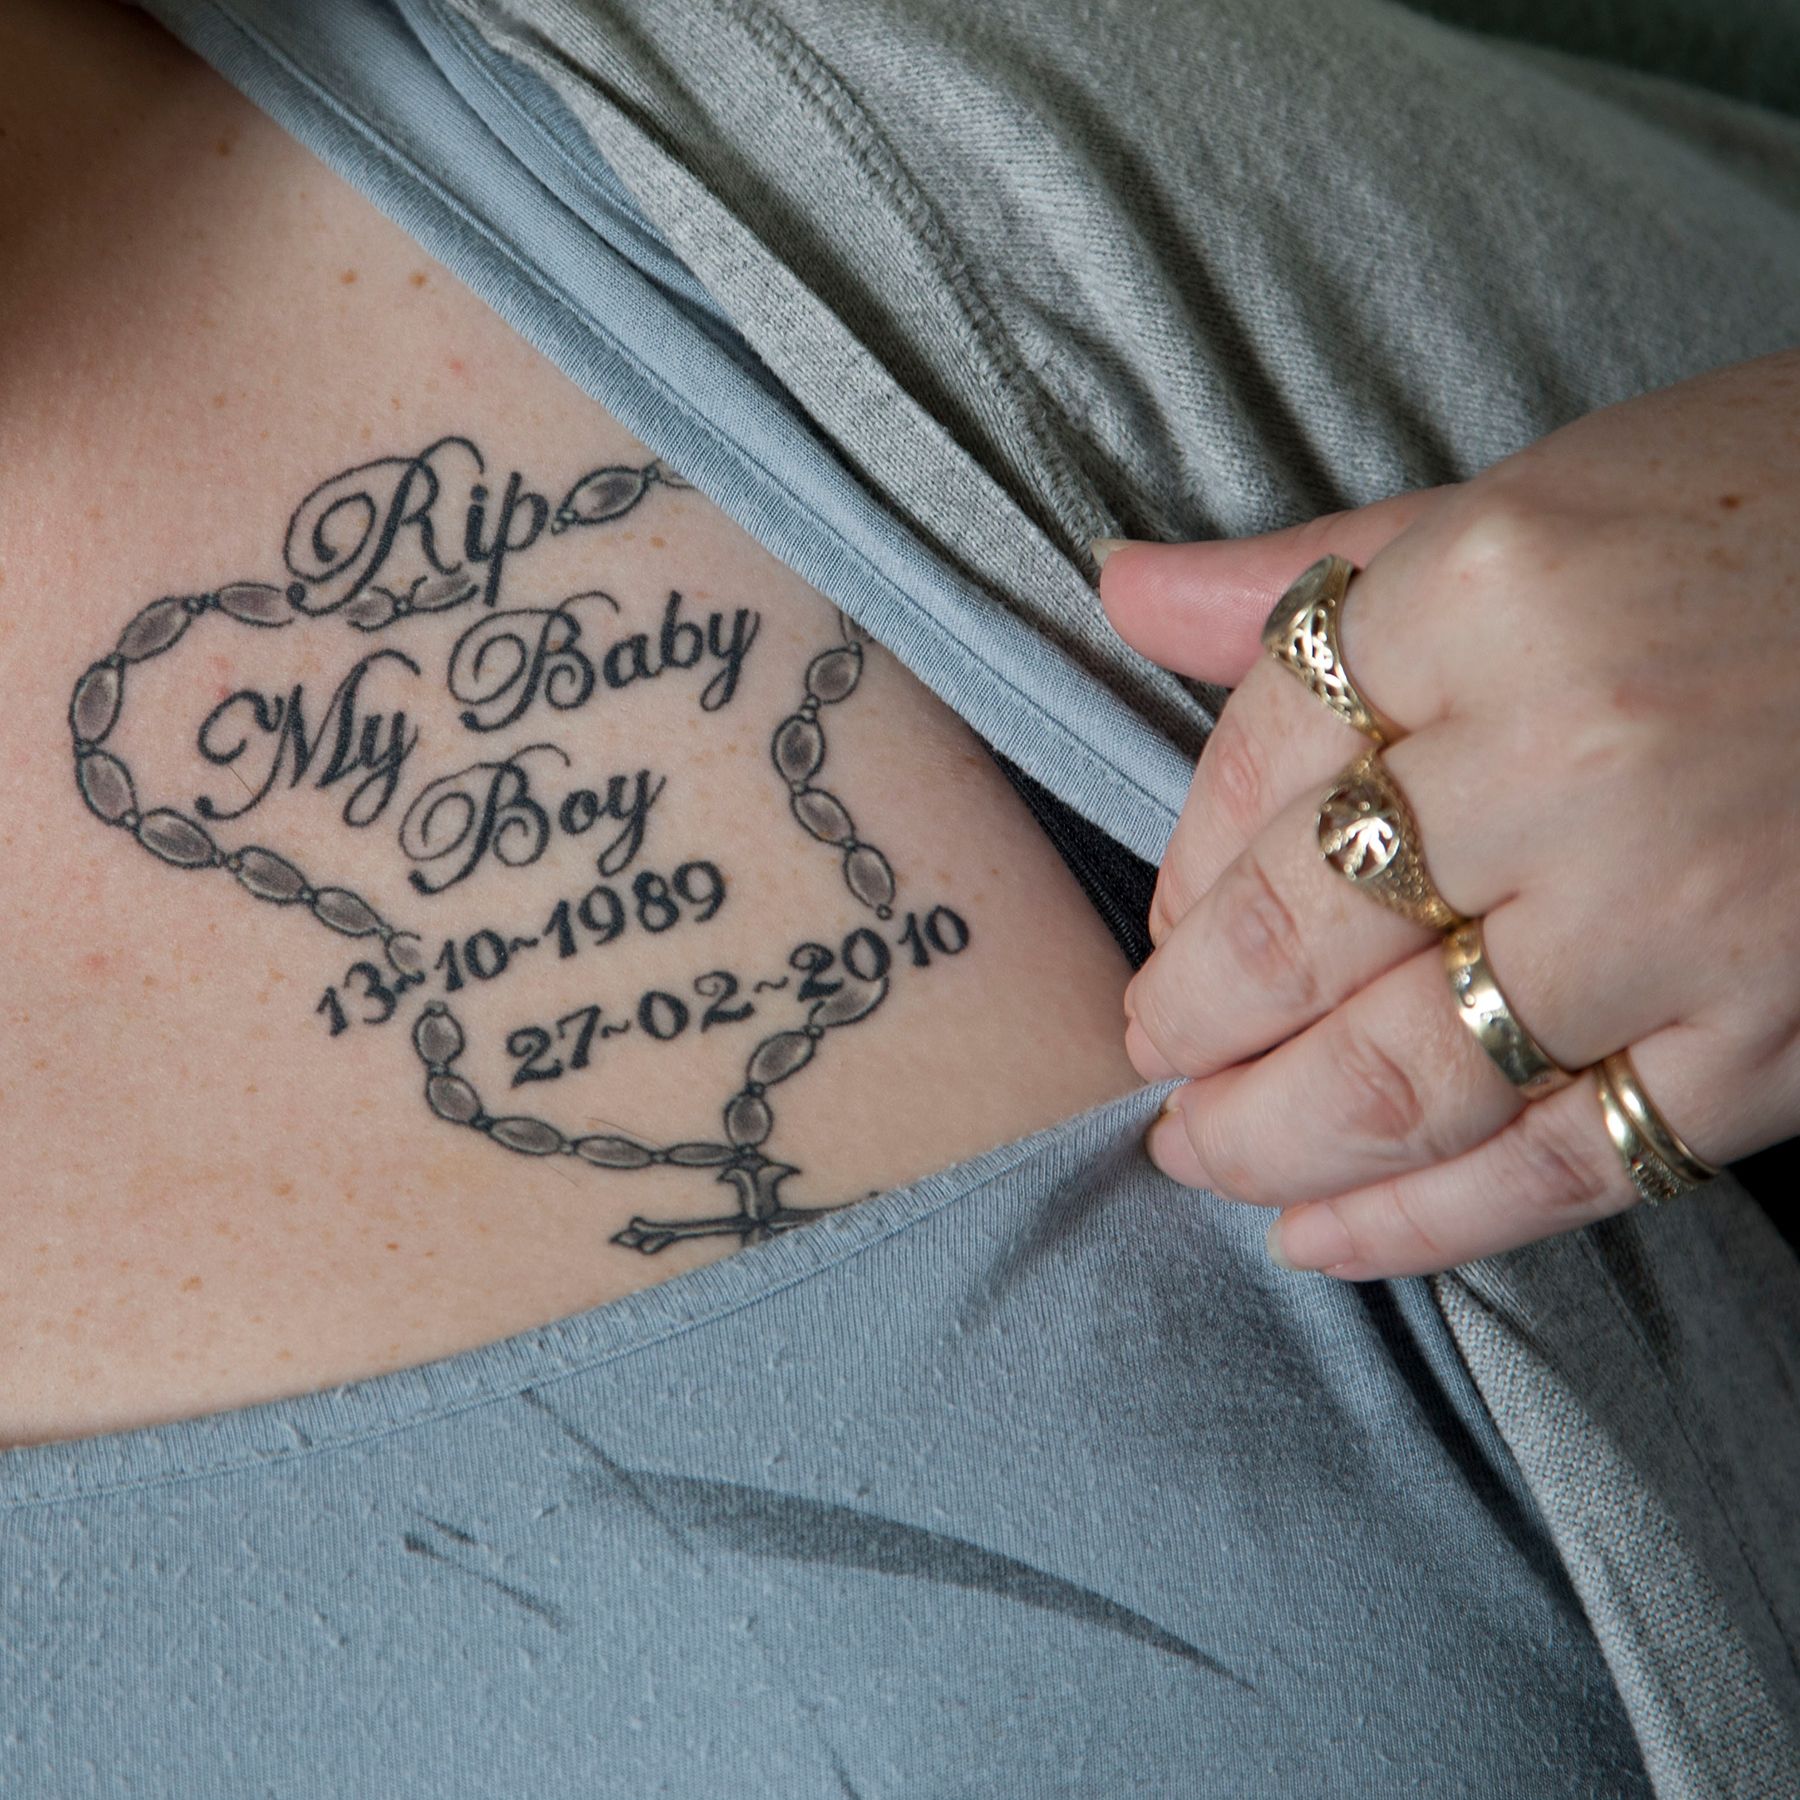 A tattoo is for life': how memorial tattoos help the bereaved | Psyche Ideas